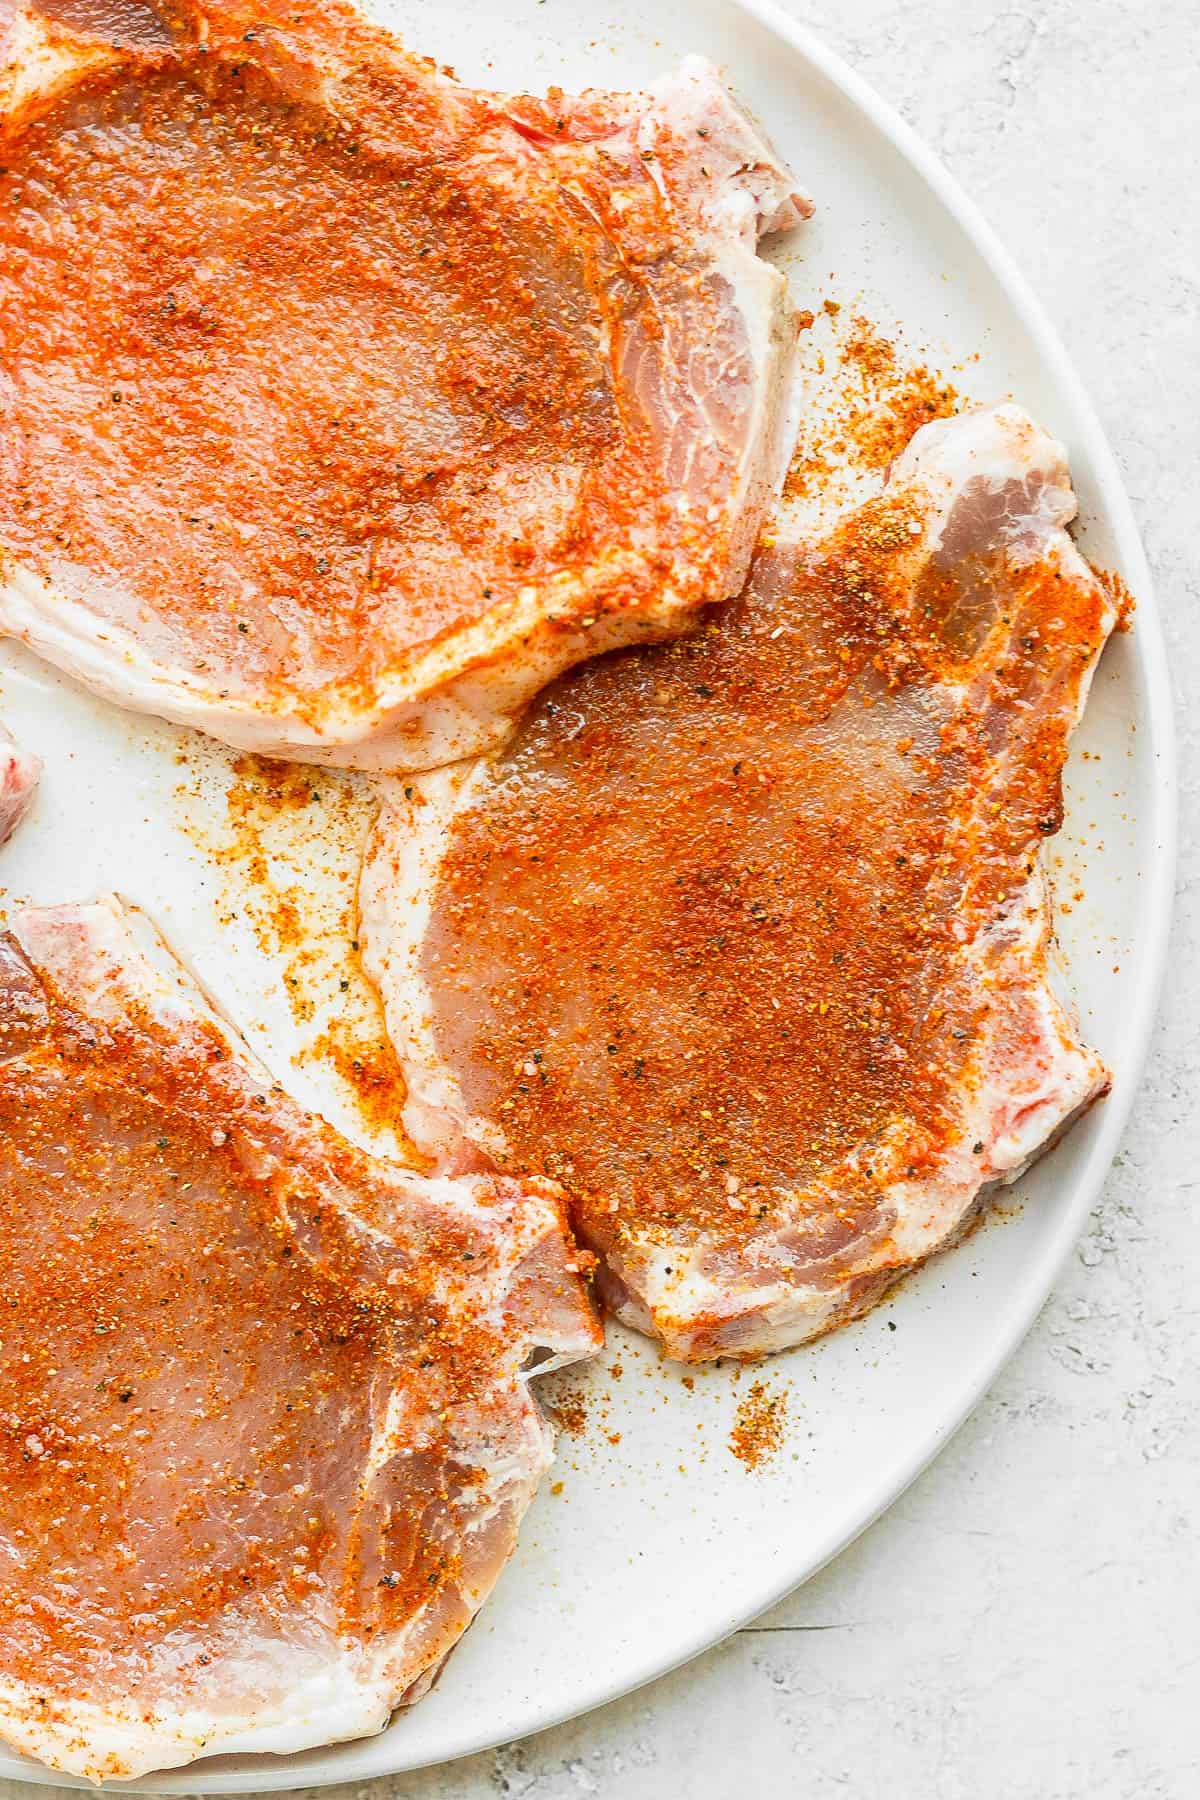 Pork chops covered with olive oil and seasoning mixture on a white plate. 